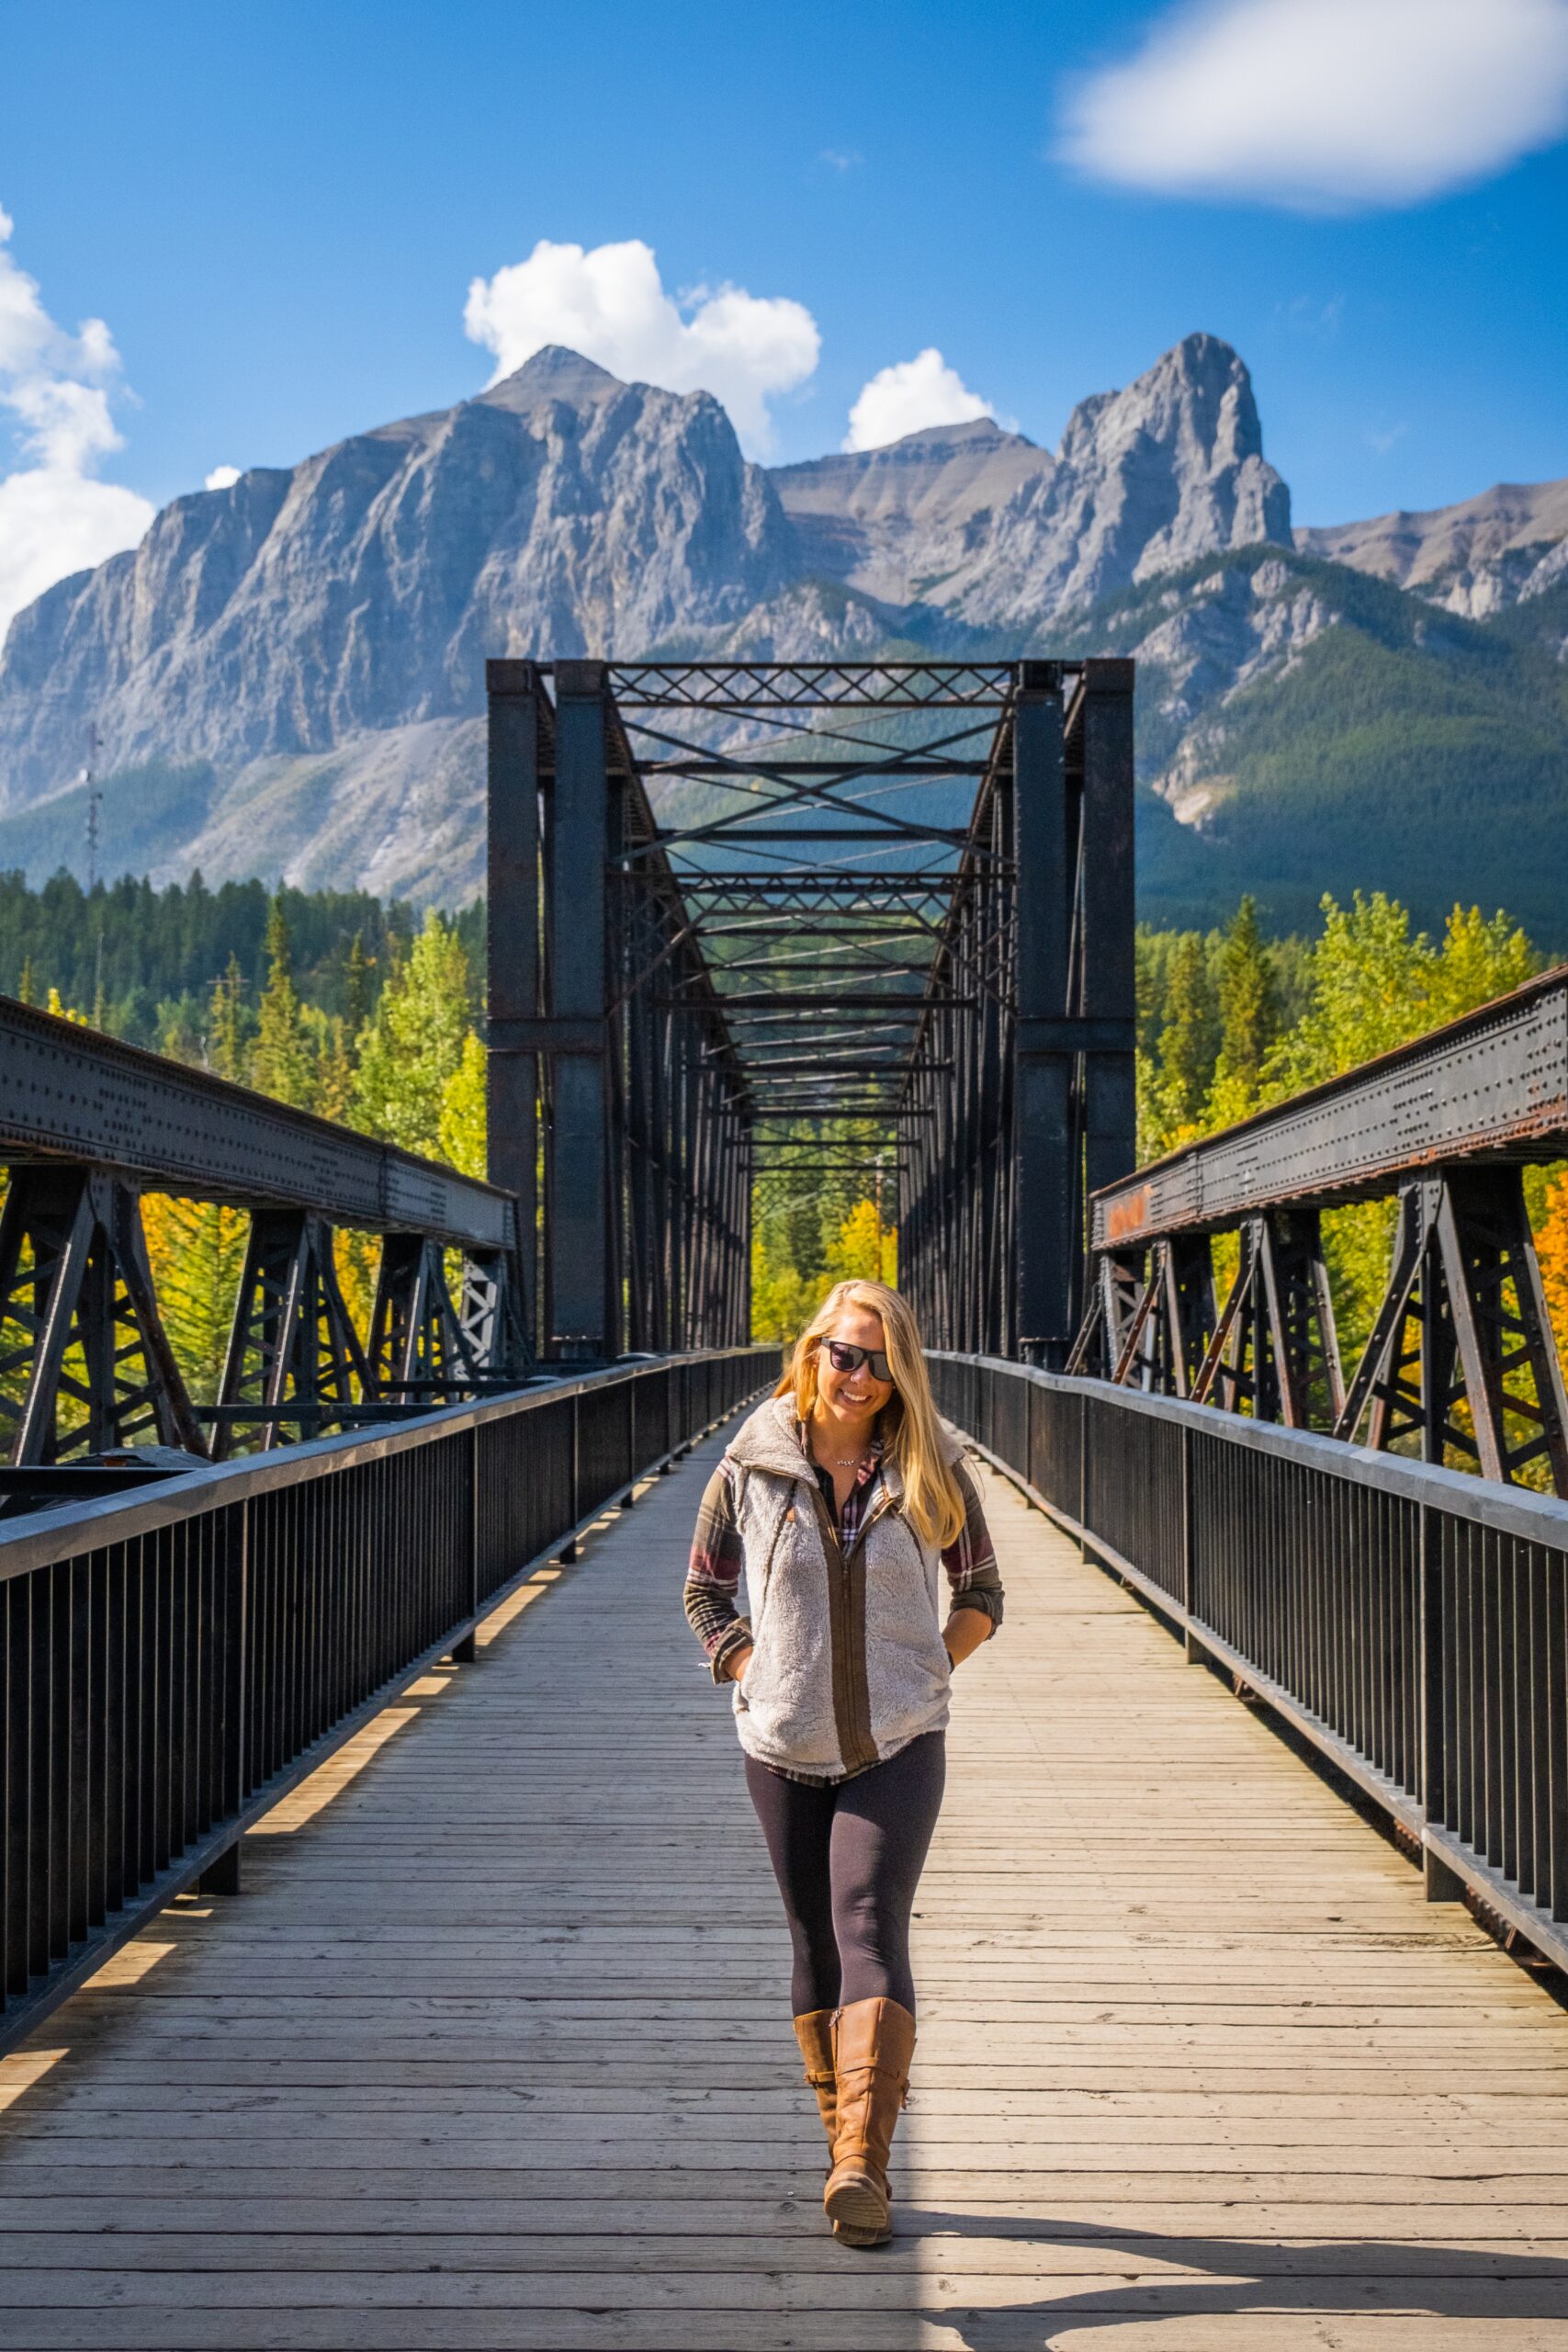 Things to do in Canmore